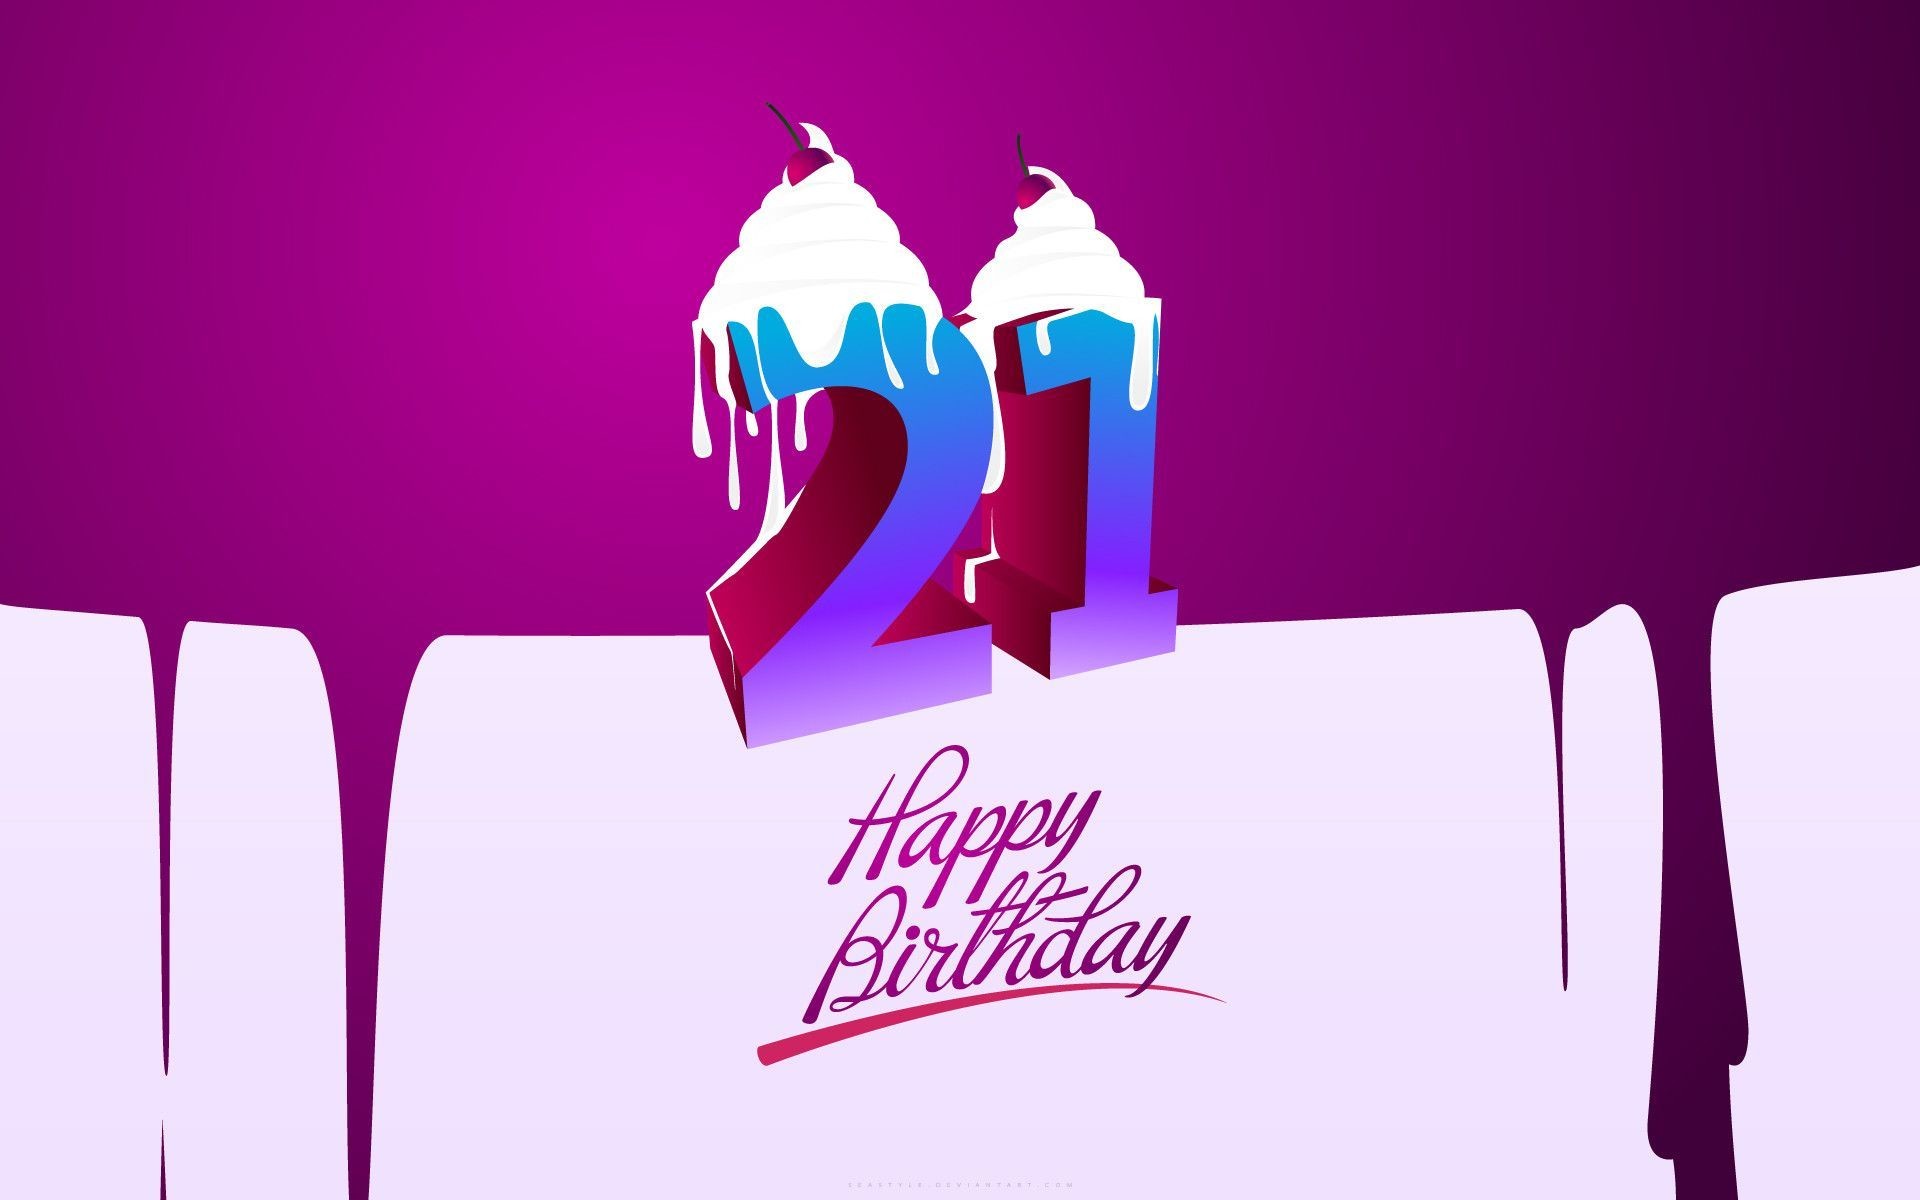 Download Happy Birthday Name Wallpaper Gallery - Happy Birthday 5g , HD Wallpaper & Backgrounds